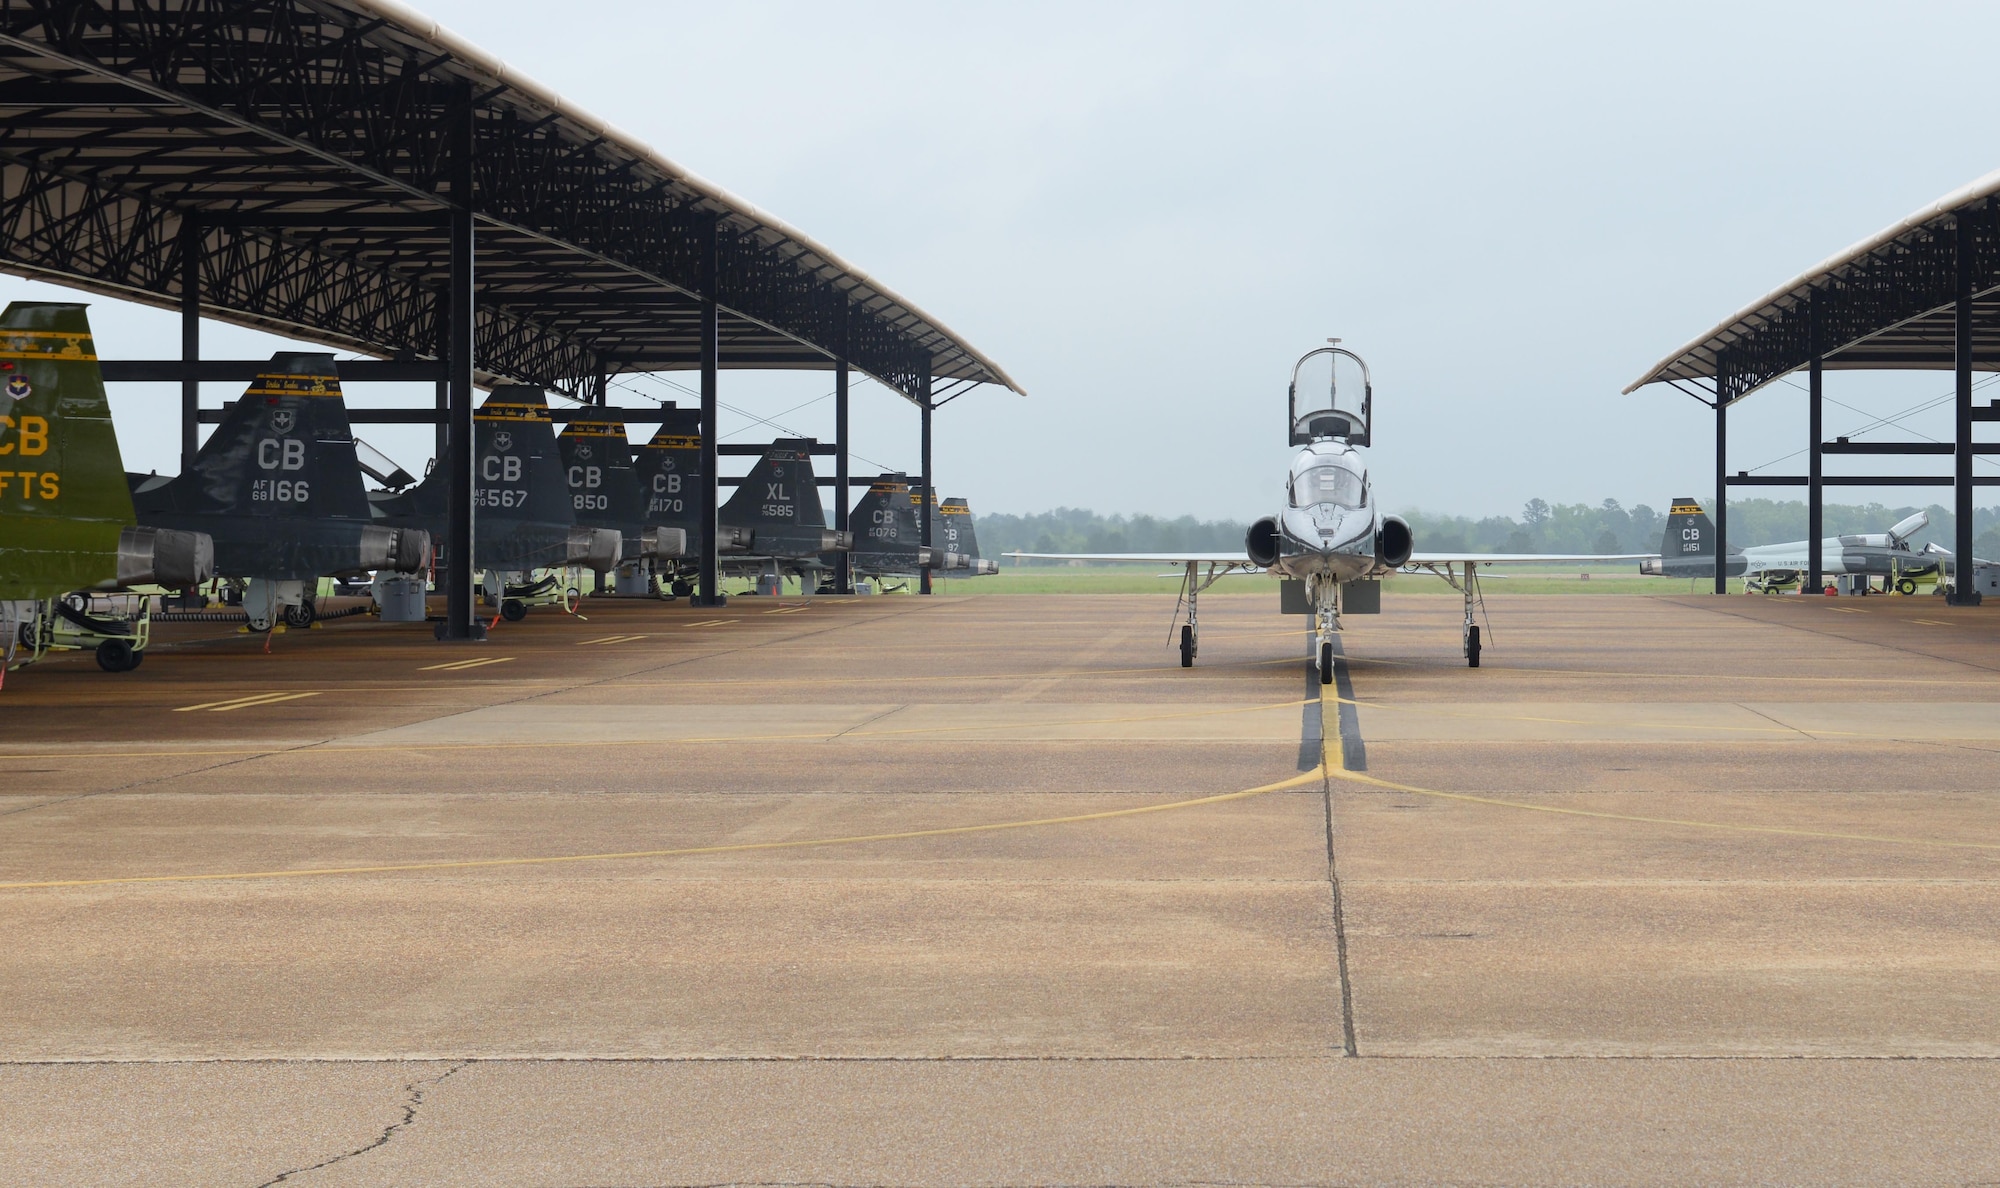 A T-38 Talon taxis toward a hangar April 8, 2020, at Columbus Air Force Base, Miss. The Air Education and Training Command is the primary user of the T-38 for joint specialized undergraduate pilot training. Pilot training has been deemed essential operations and continues amid the COVID-19 pandemic. (U.S. Air Force photo by Airman 1st Class Davis Donaldson)